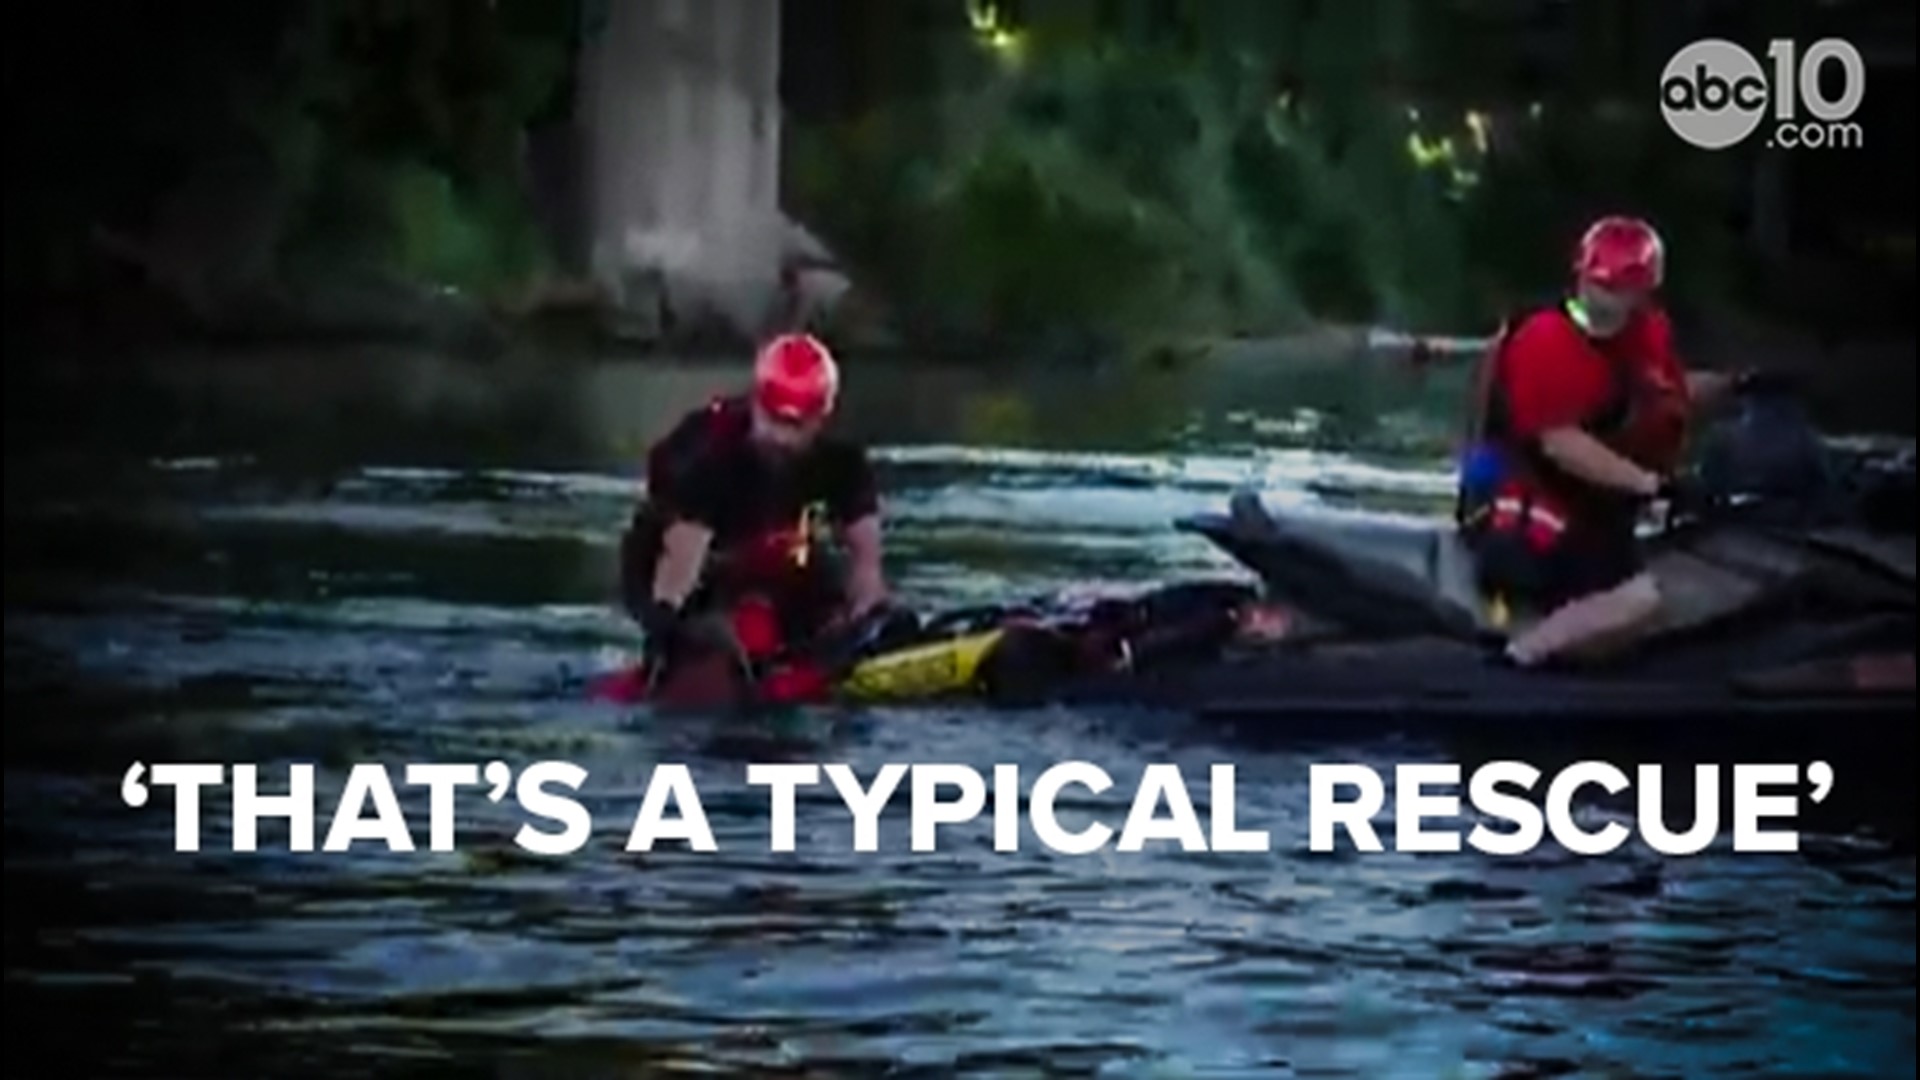 The Drowning Accident Rescue Team spoke with ABC10 about their rescue operations in Sacramento rivers and other water ways.